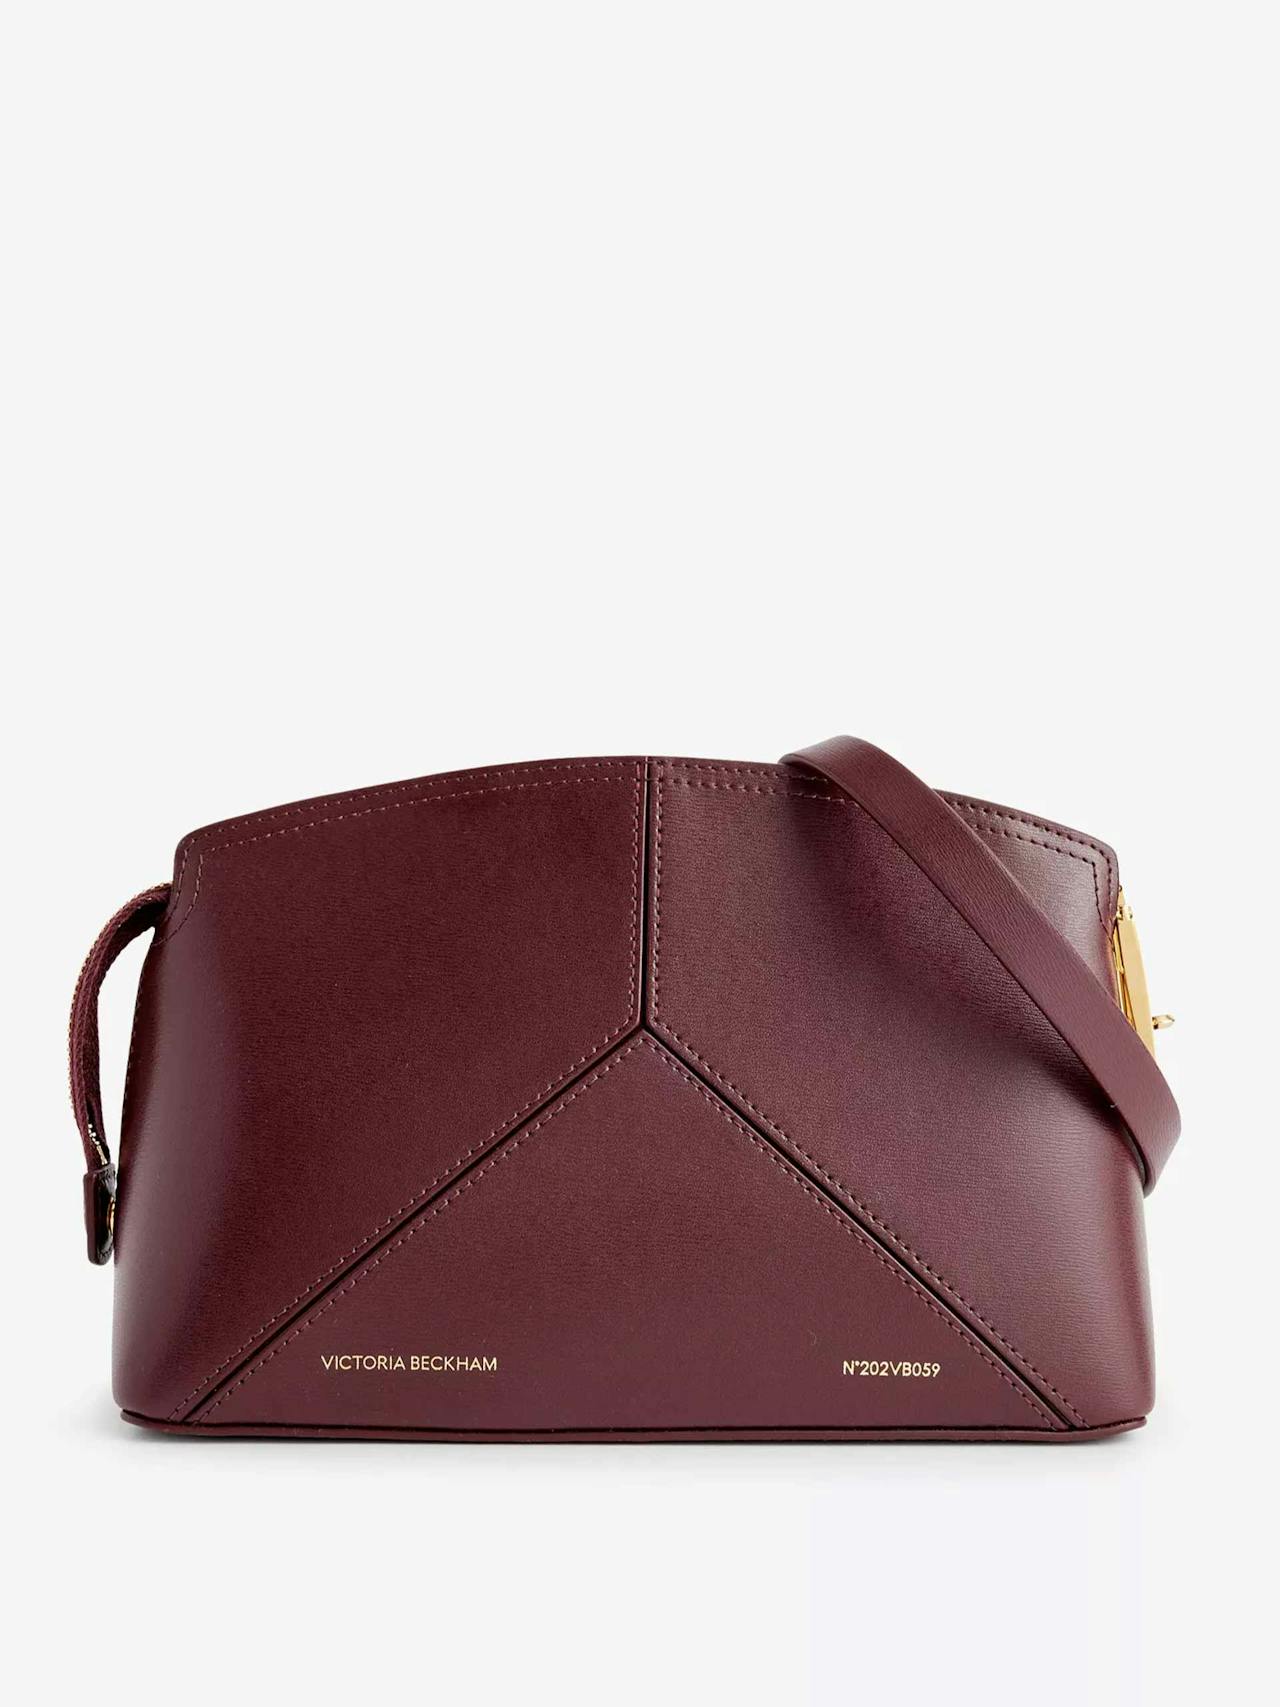 Small leather clutch